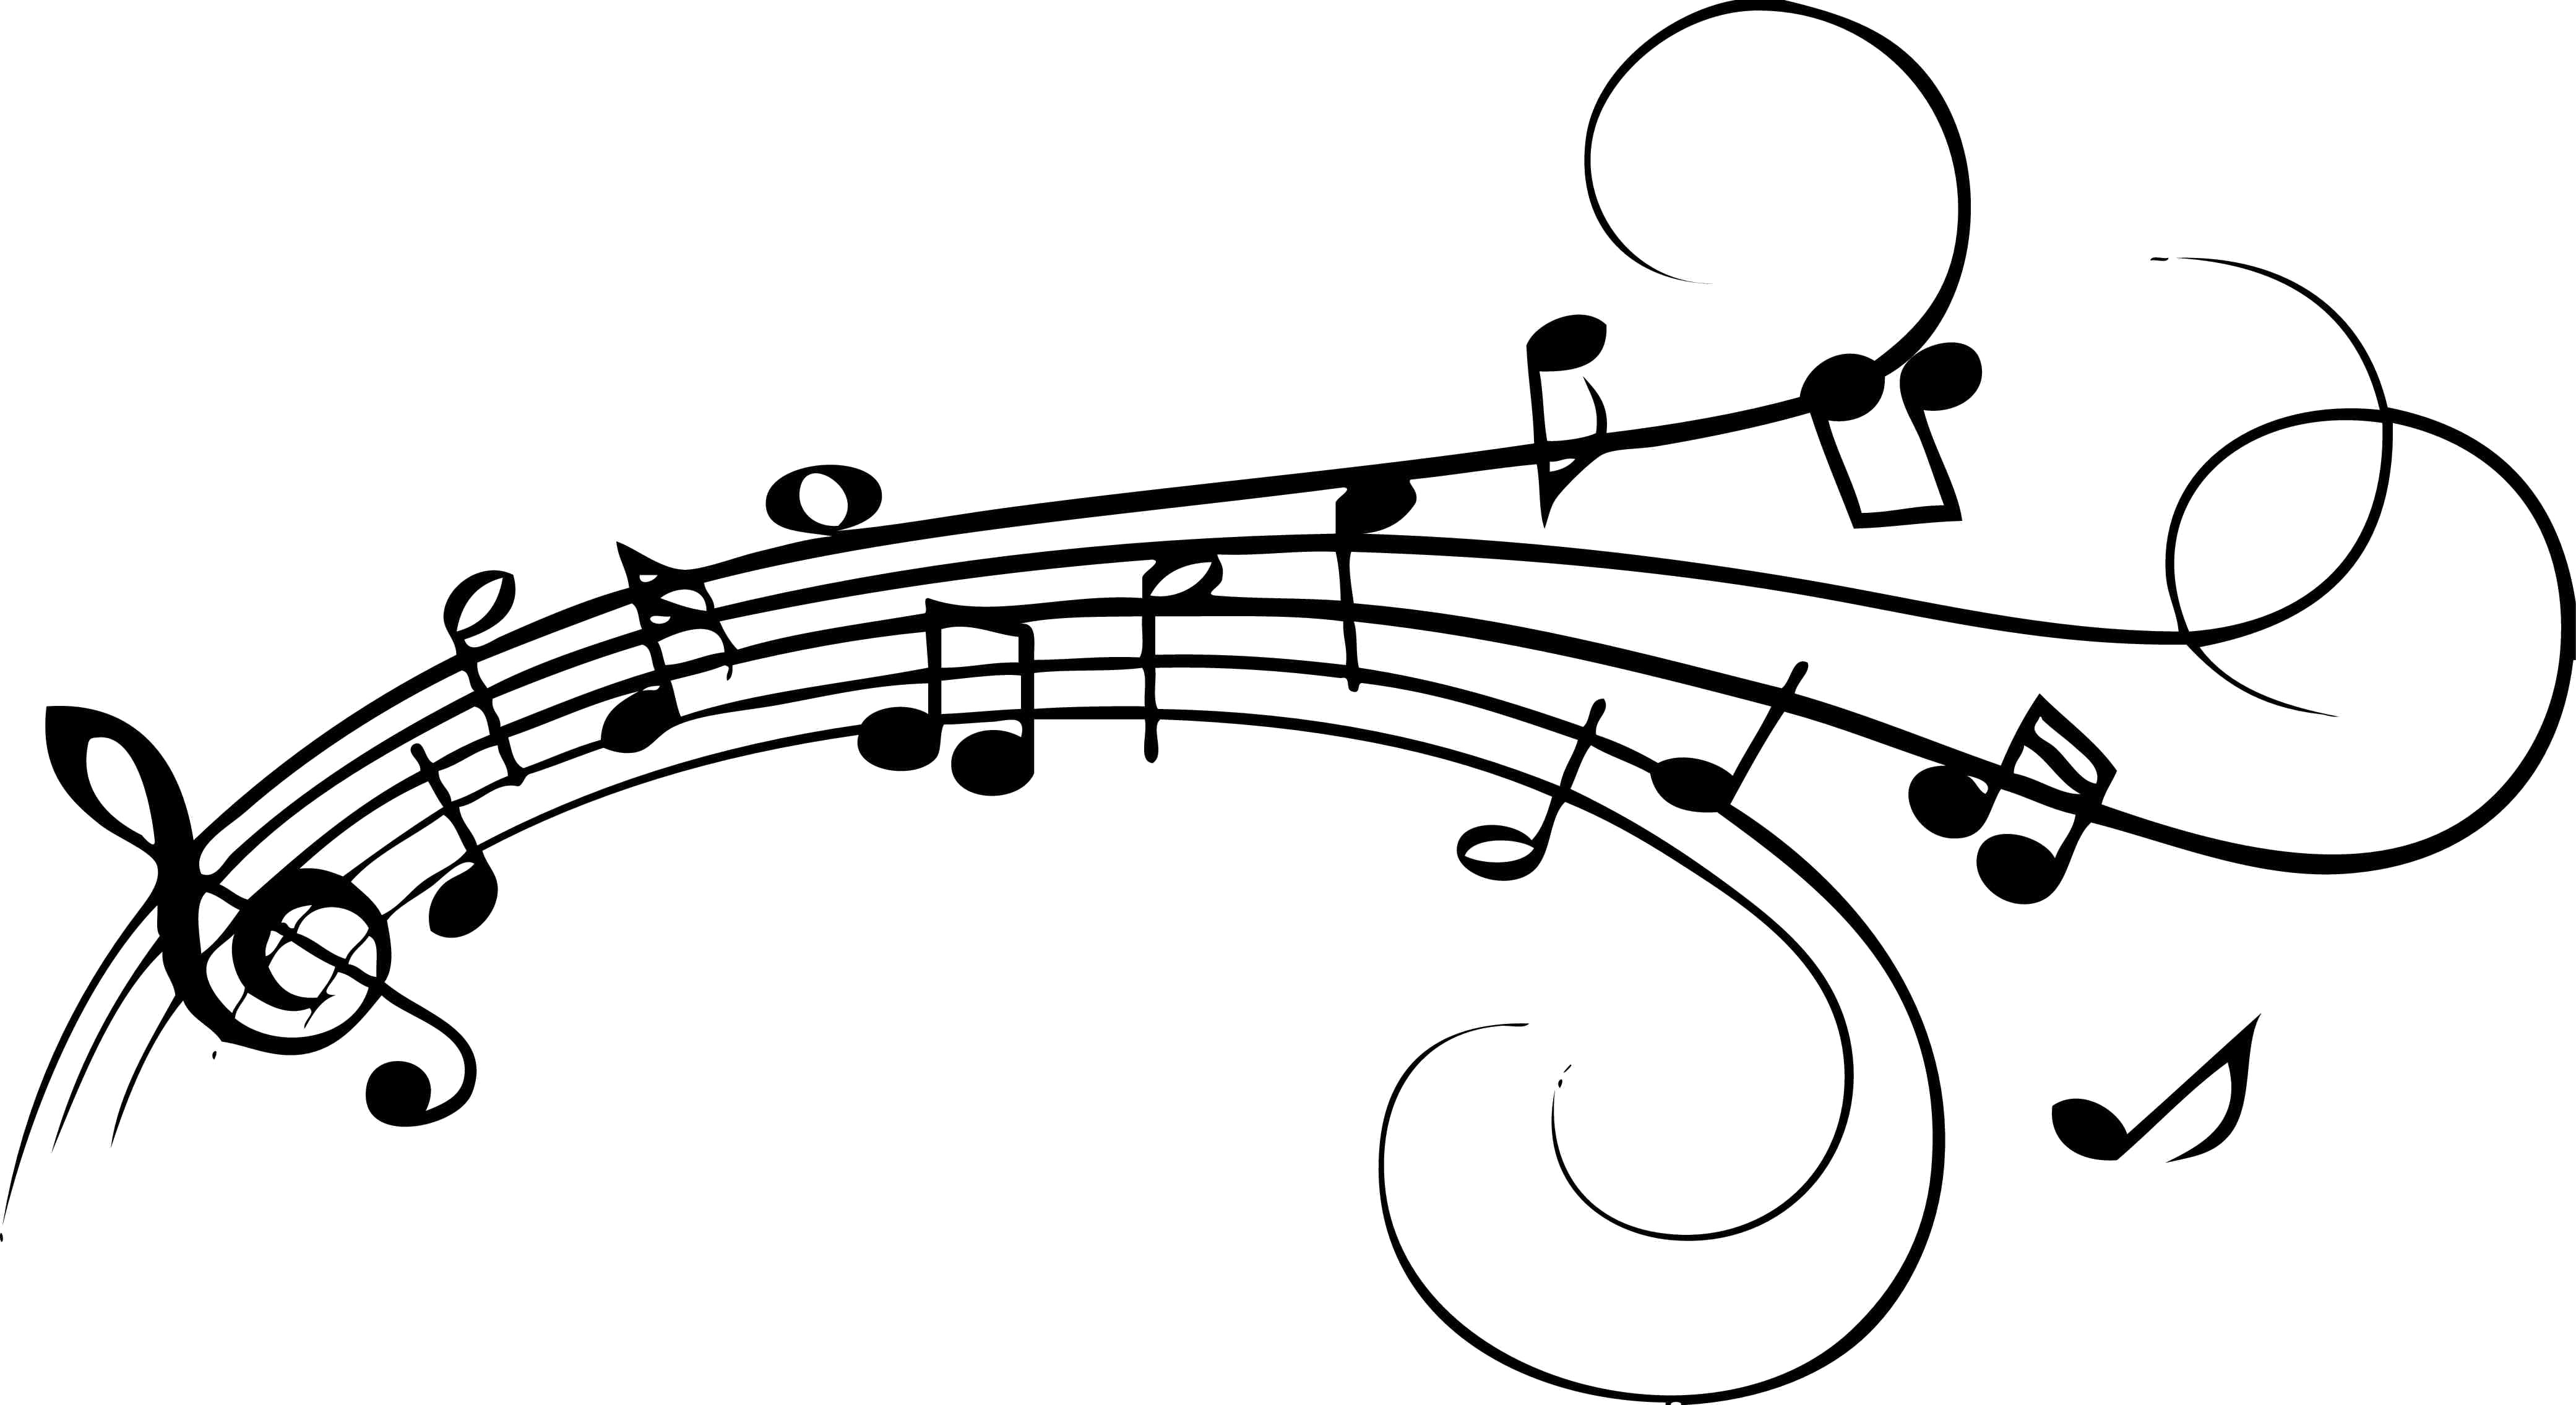 Download Musical Notation Symbol Image PNG Image High Quality HQ PNG